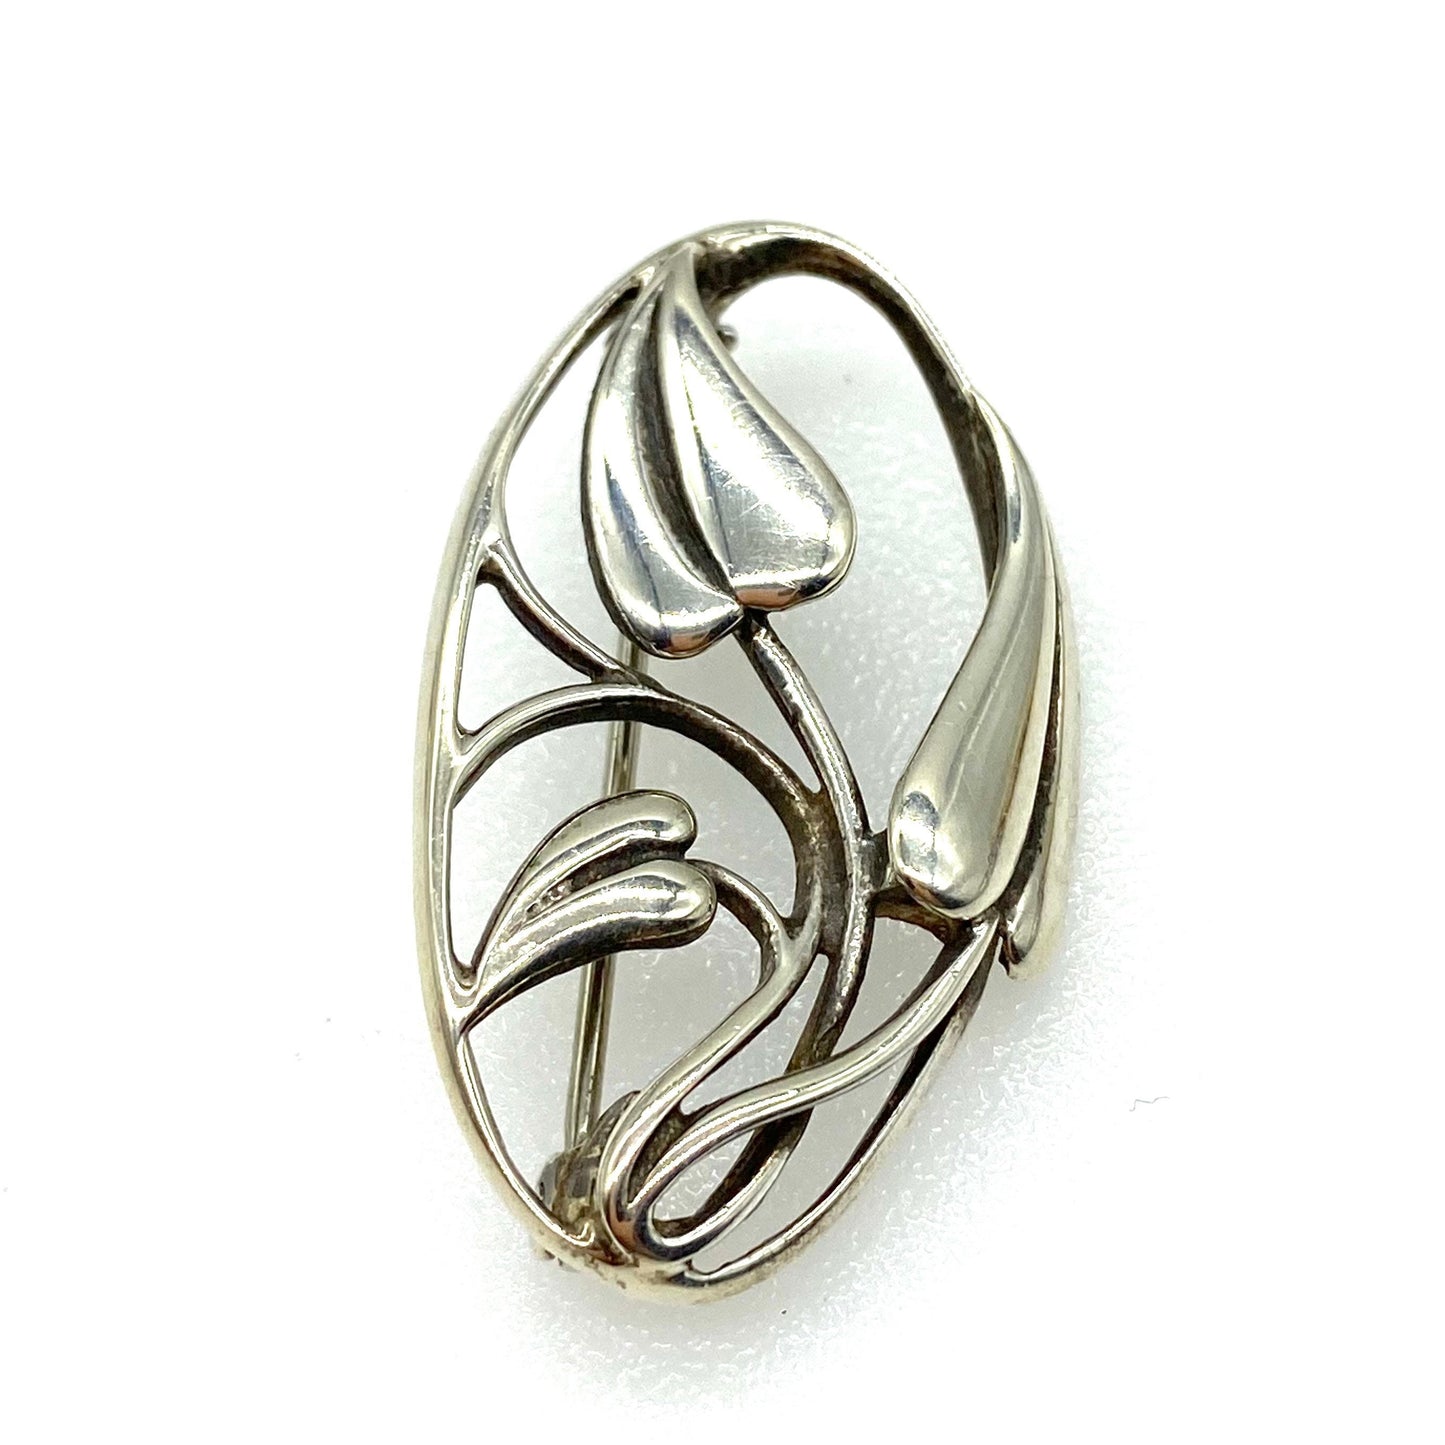 Ola M Gorie Sterling Silver Open Work Art Nouveau/Arts and Crafts Style Cecily Brooch